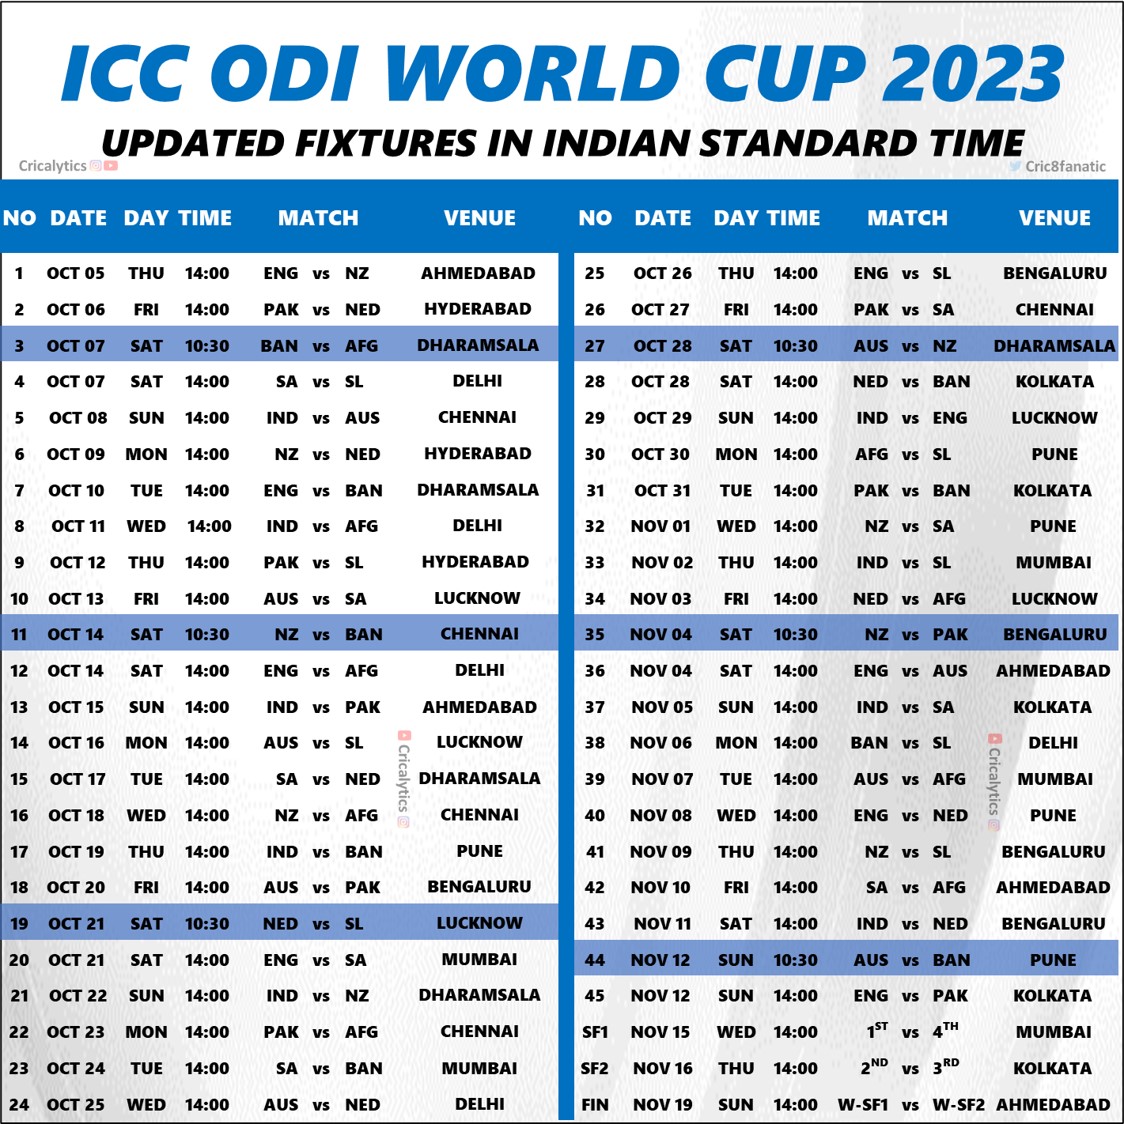 ODI World Cup 2023 Updated 10 Teams Fixtures List Download